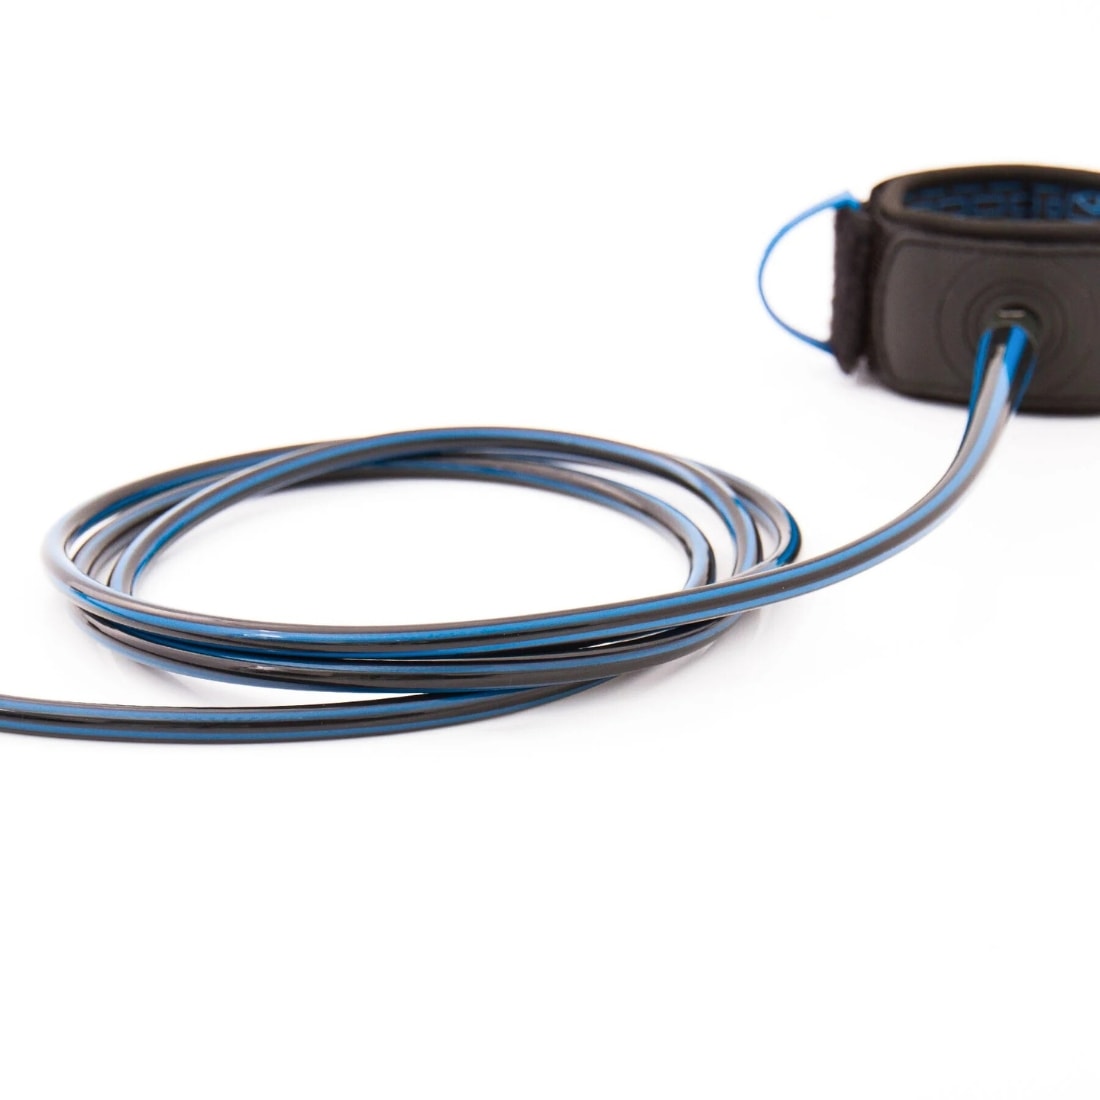 Ocean And Earth 6Ft One Xt Cold Water All Round/Comp Surfboard Leash - Blue - 6ft Surfboard Leash by Ocean and Earth 6ft